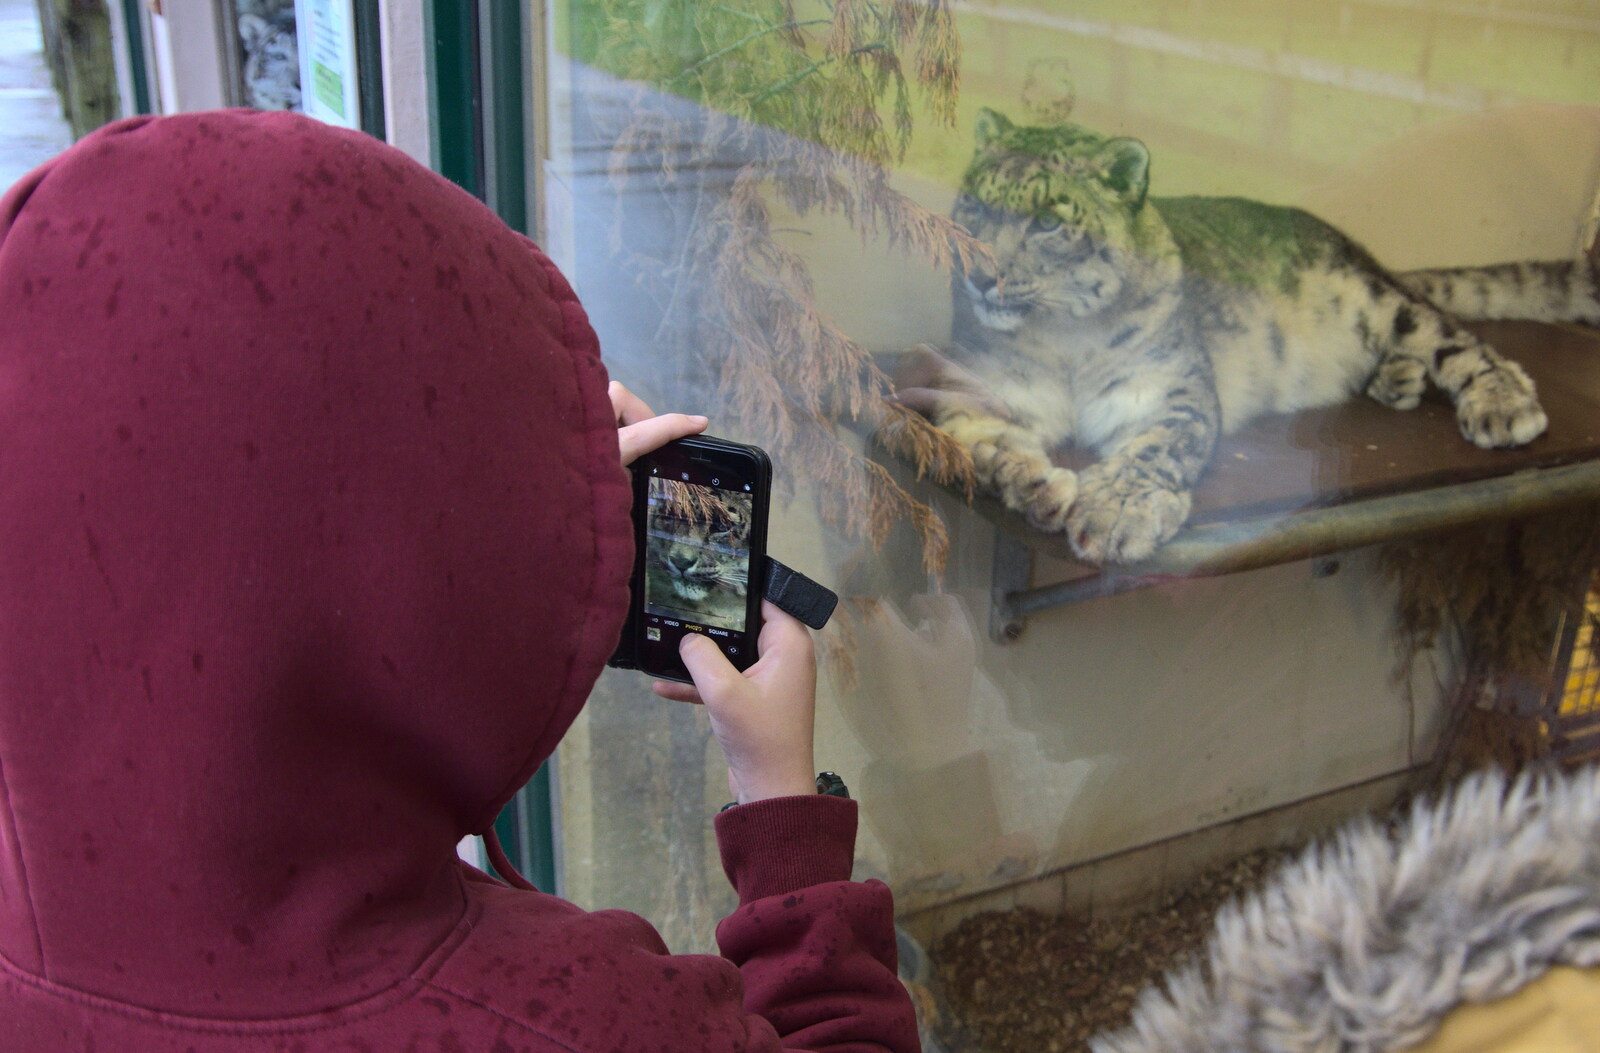 A Few Hours at the Zoo, Banham, Norfolk - 8th January 2023: Fred takes a photo of the one-eyed snow leopard